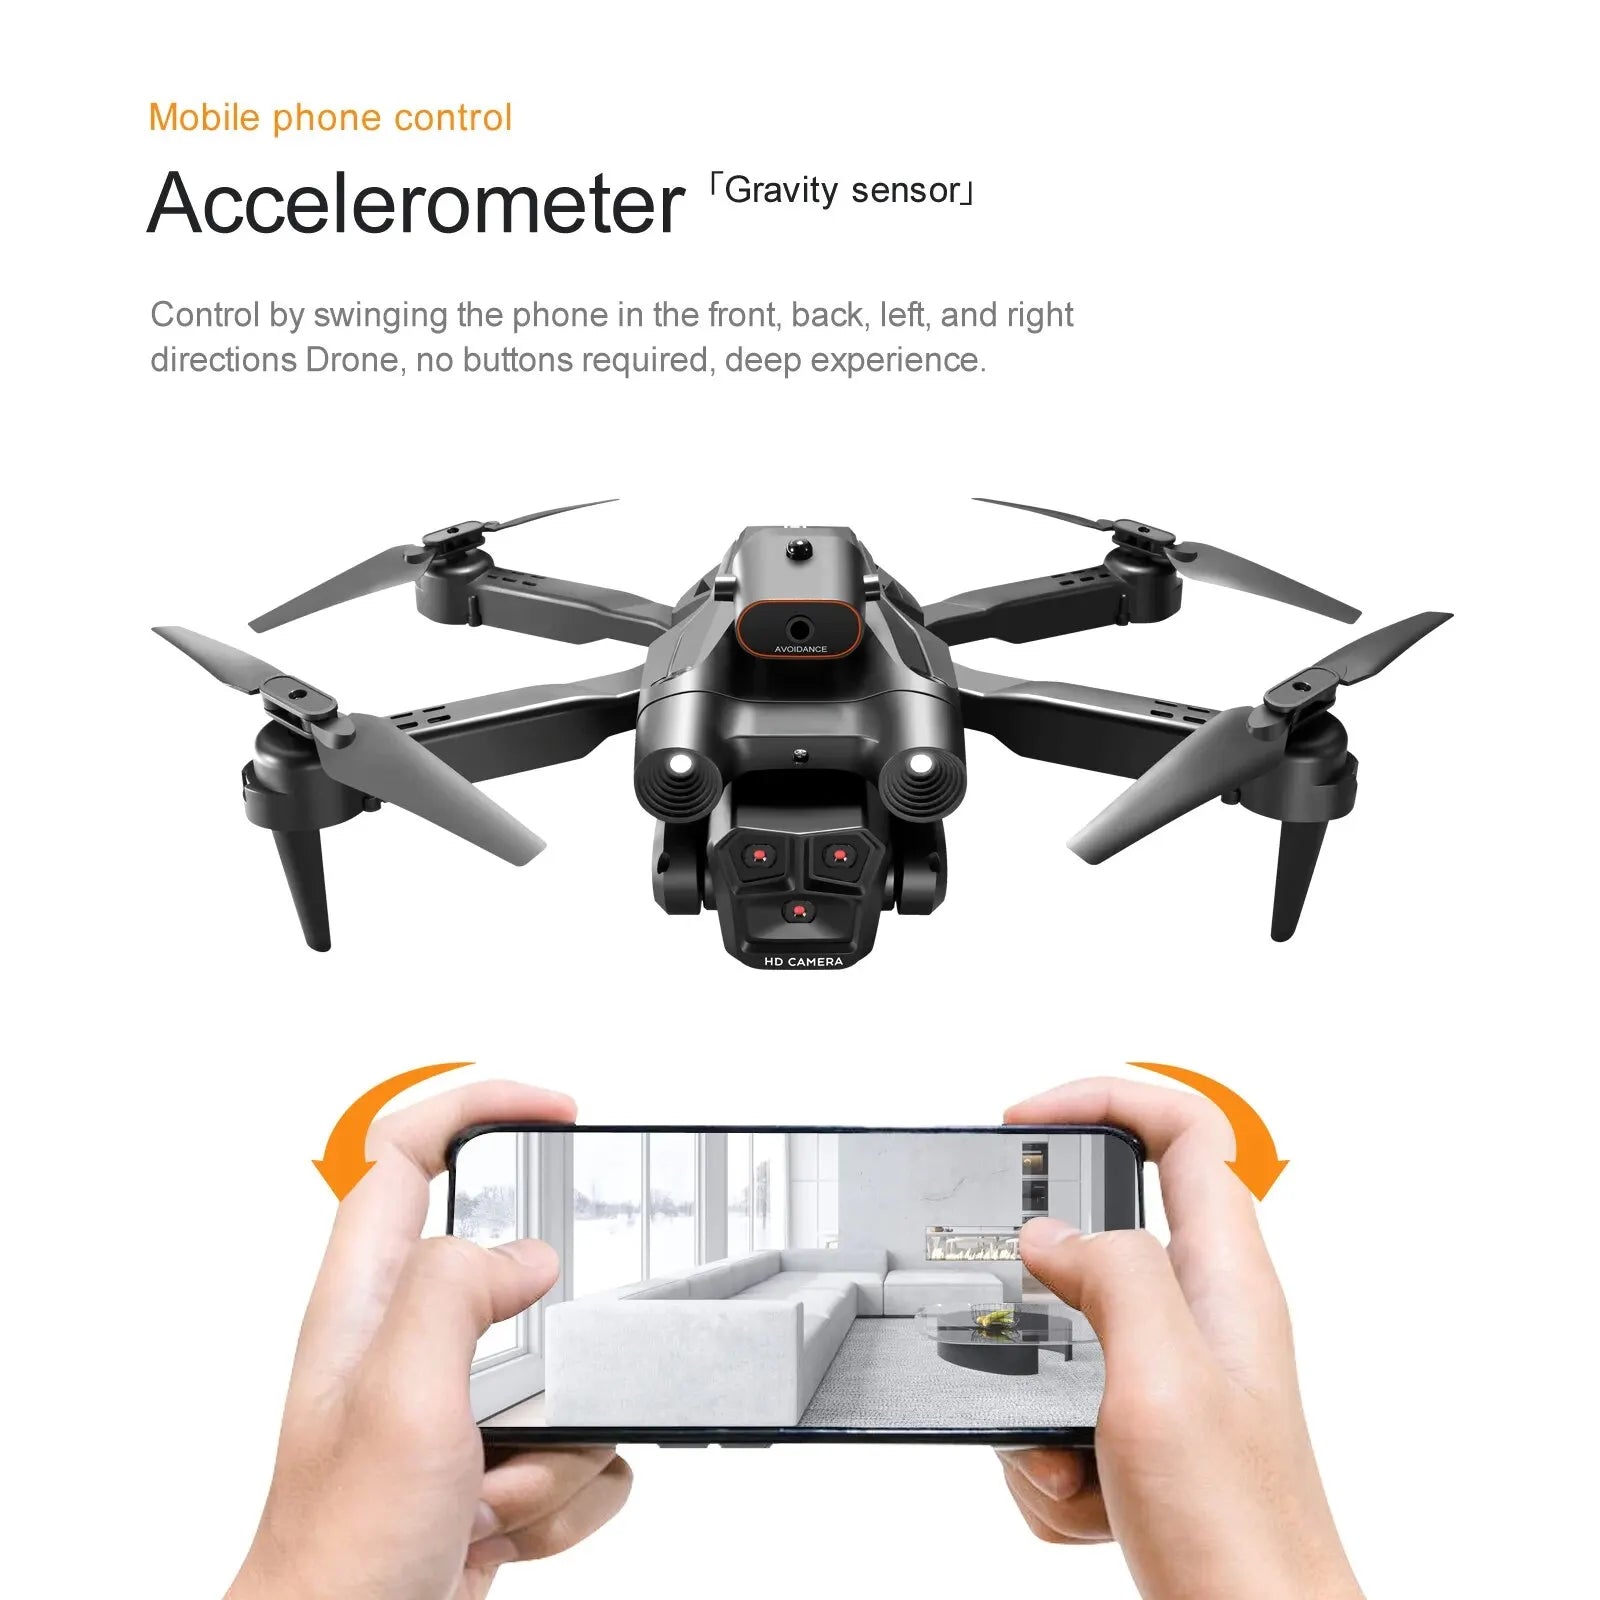 S92 Drone, mobile phone control by swinging the phone in the front; back;